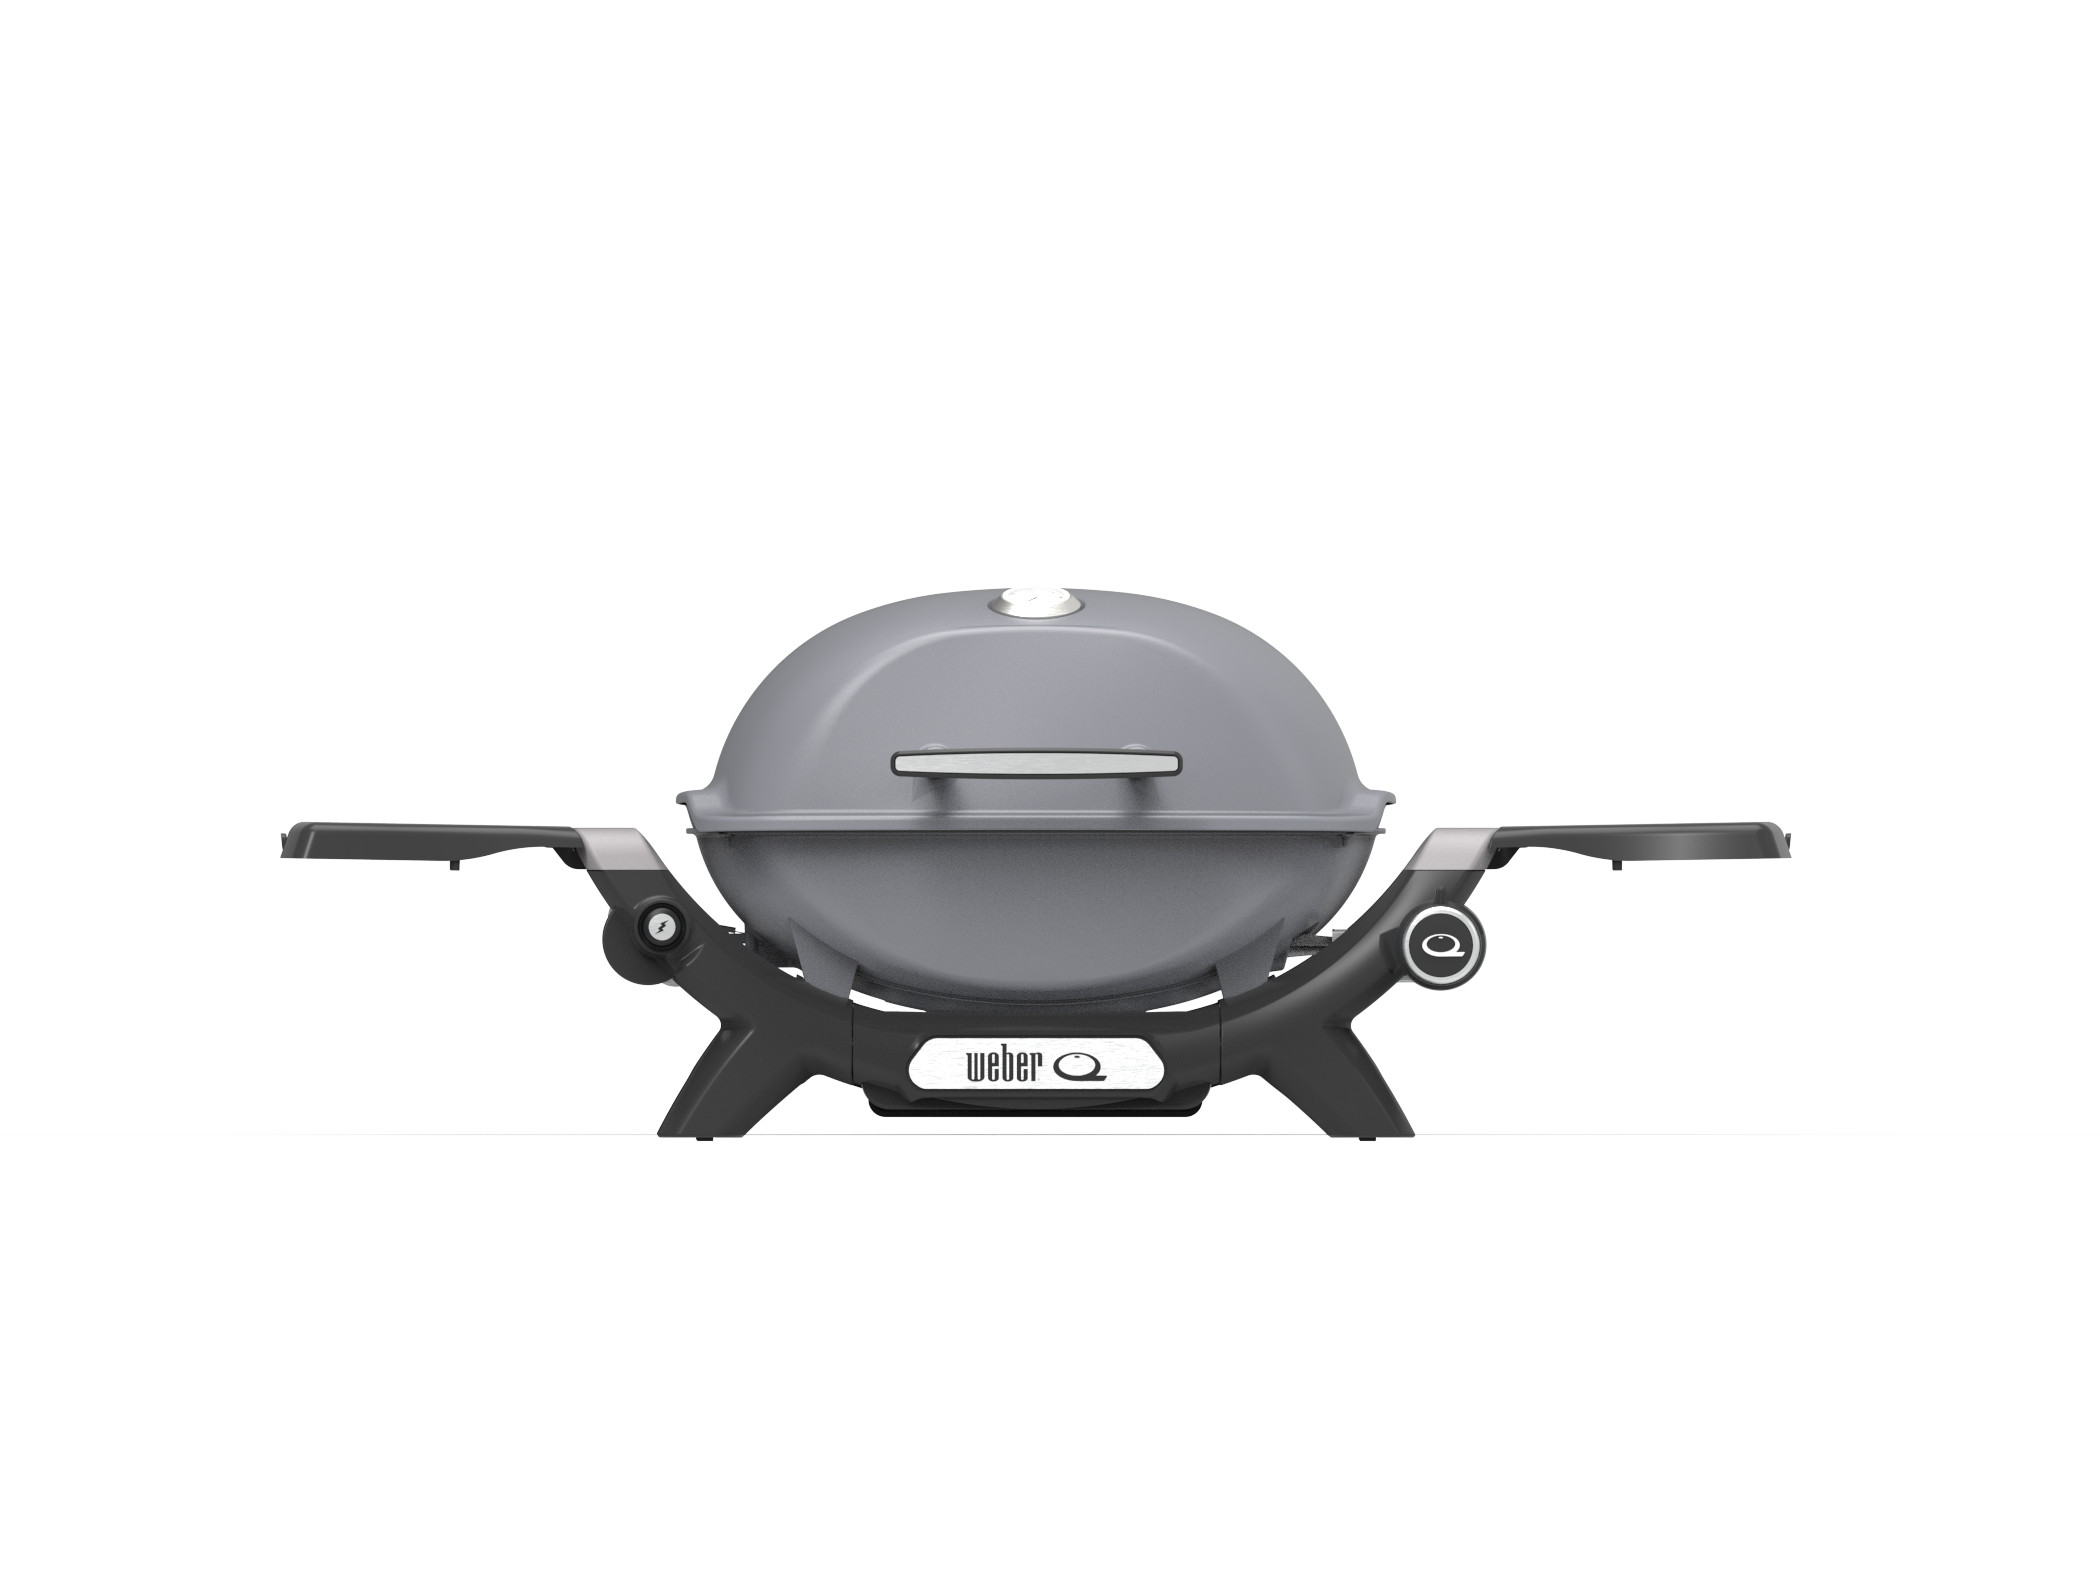 Weber Q 1200 front view in smoke grey